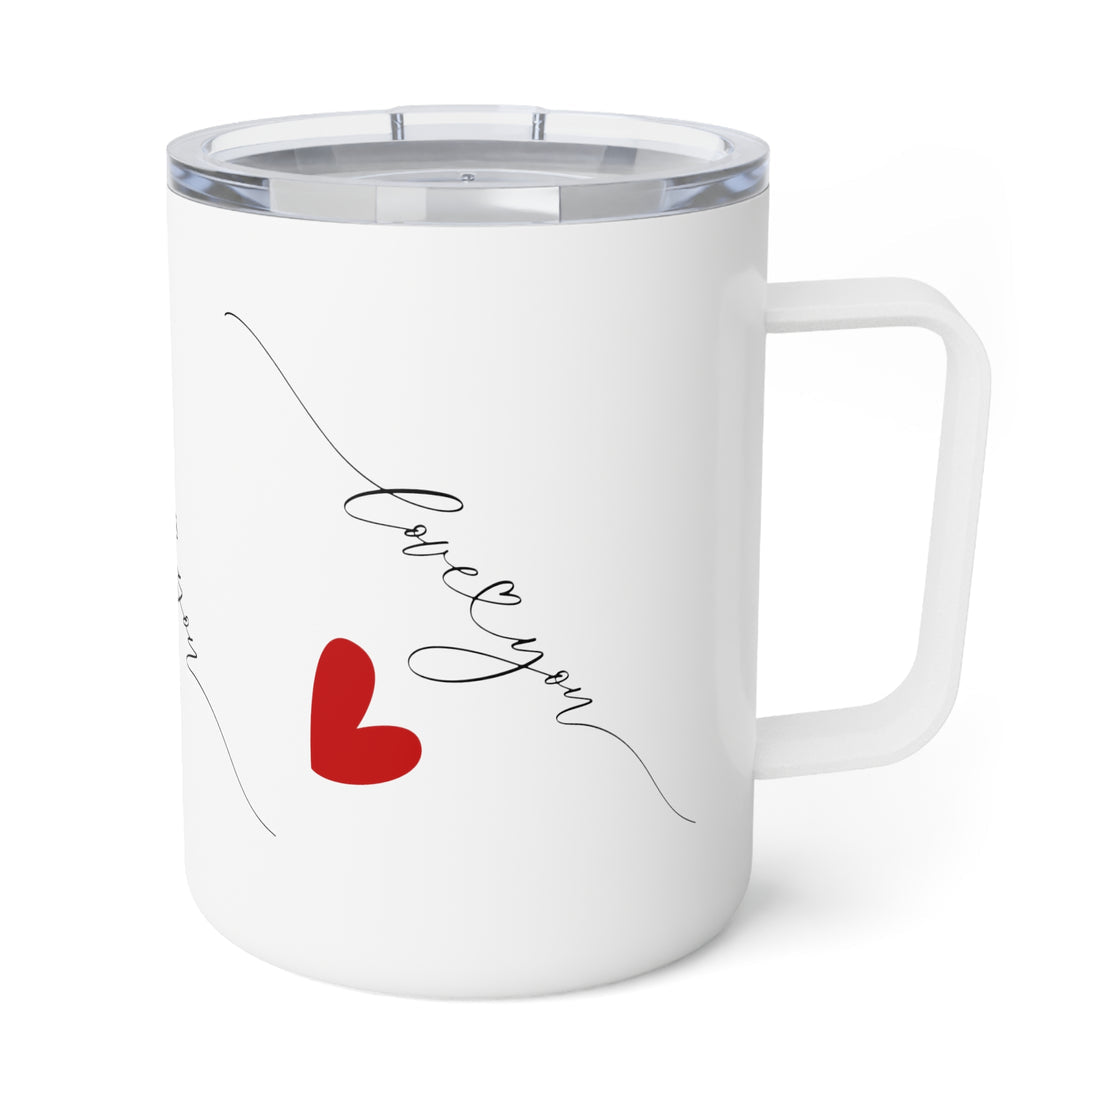 Love You Insulated Travel Coffee Mugs for Valentine's Day, 10 oz